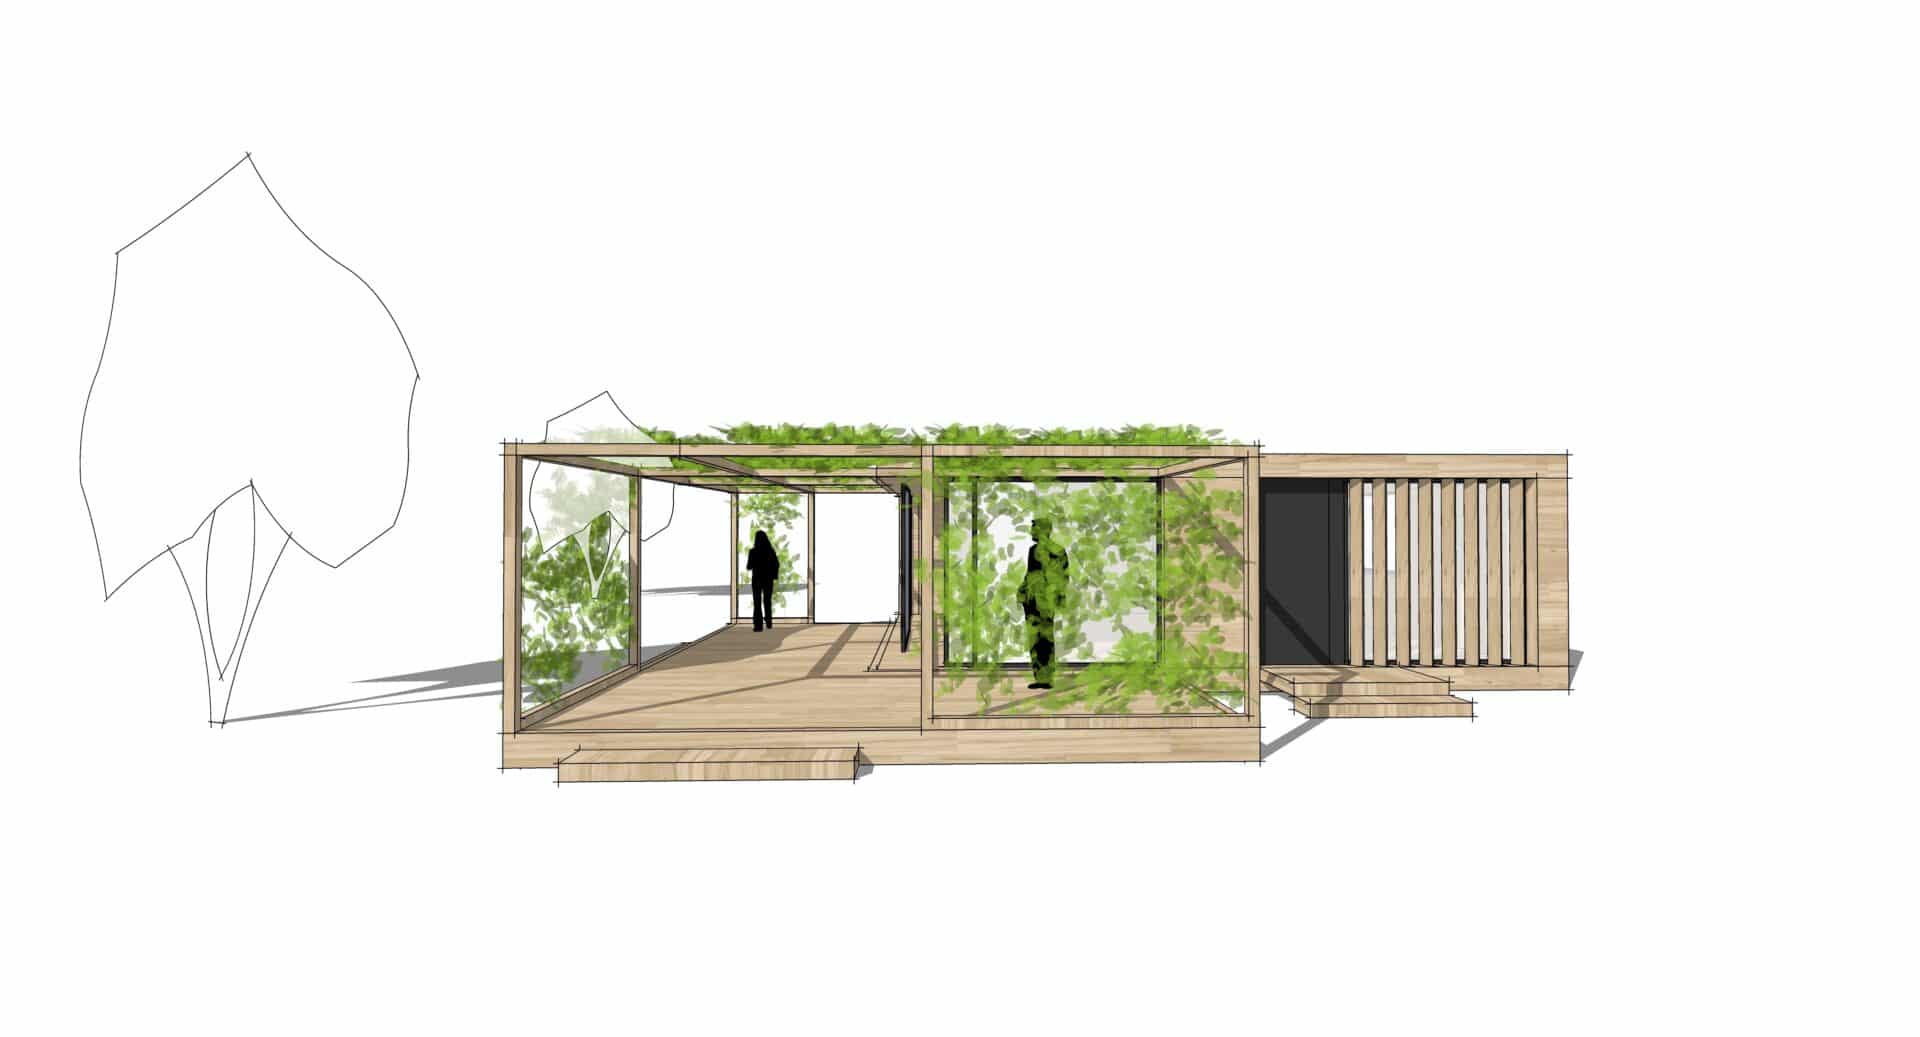 Tiny house et the office. Development of outdoor spaces in companies. Out Of Office work.